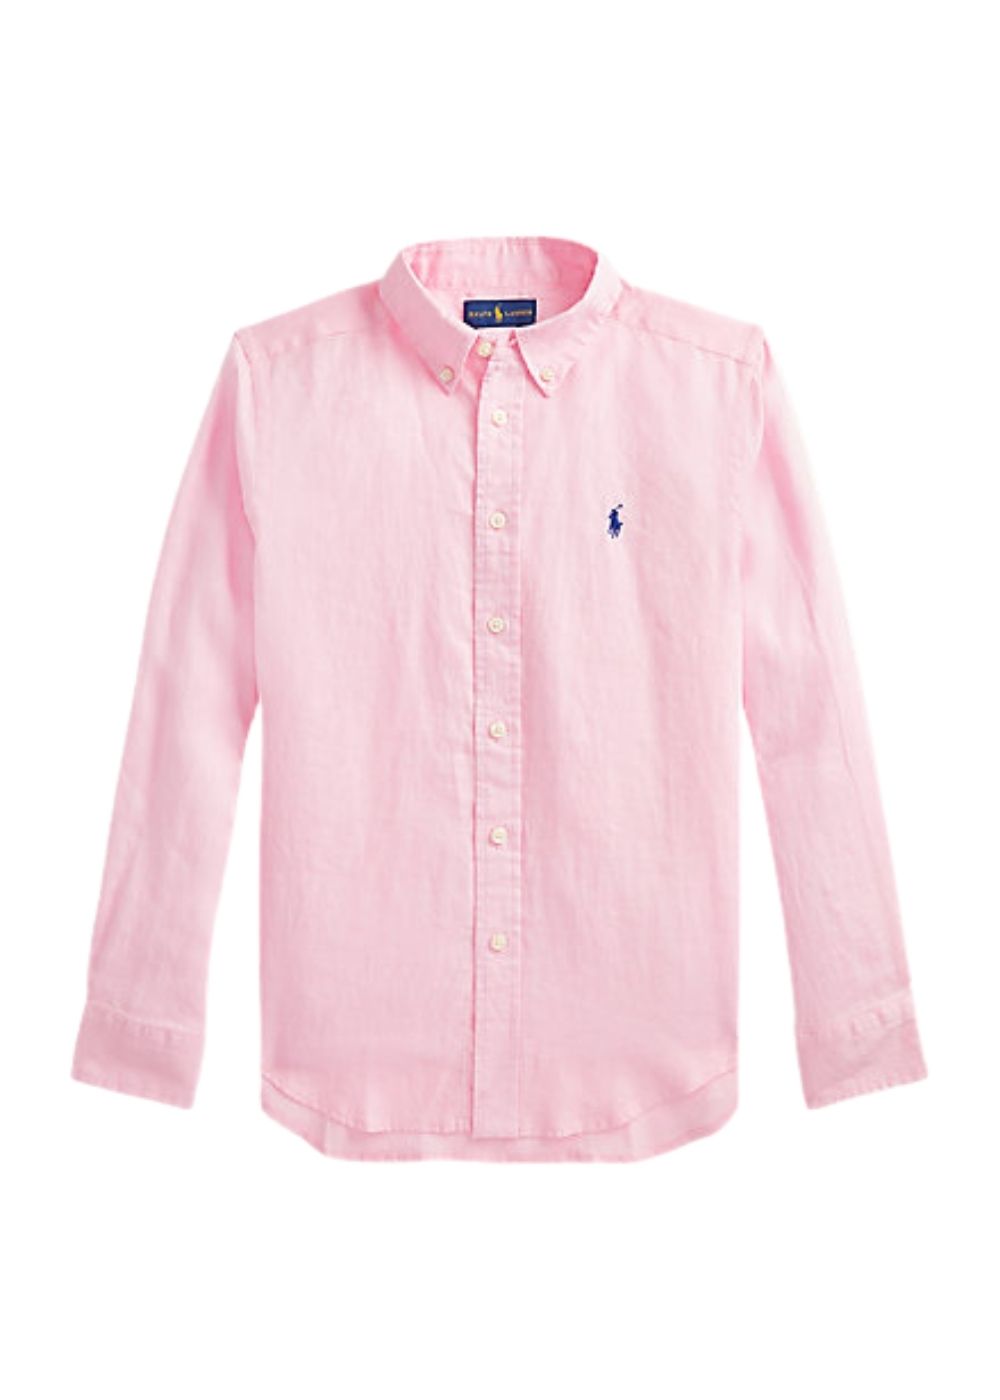 Featured image for “Polo Ralph Lauren Camicia In Lino”